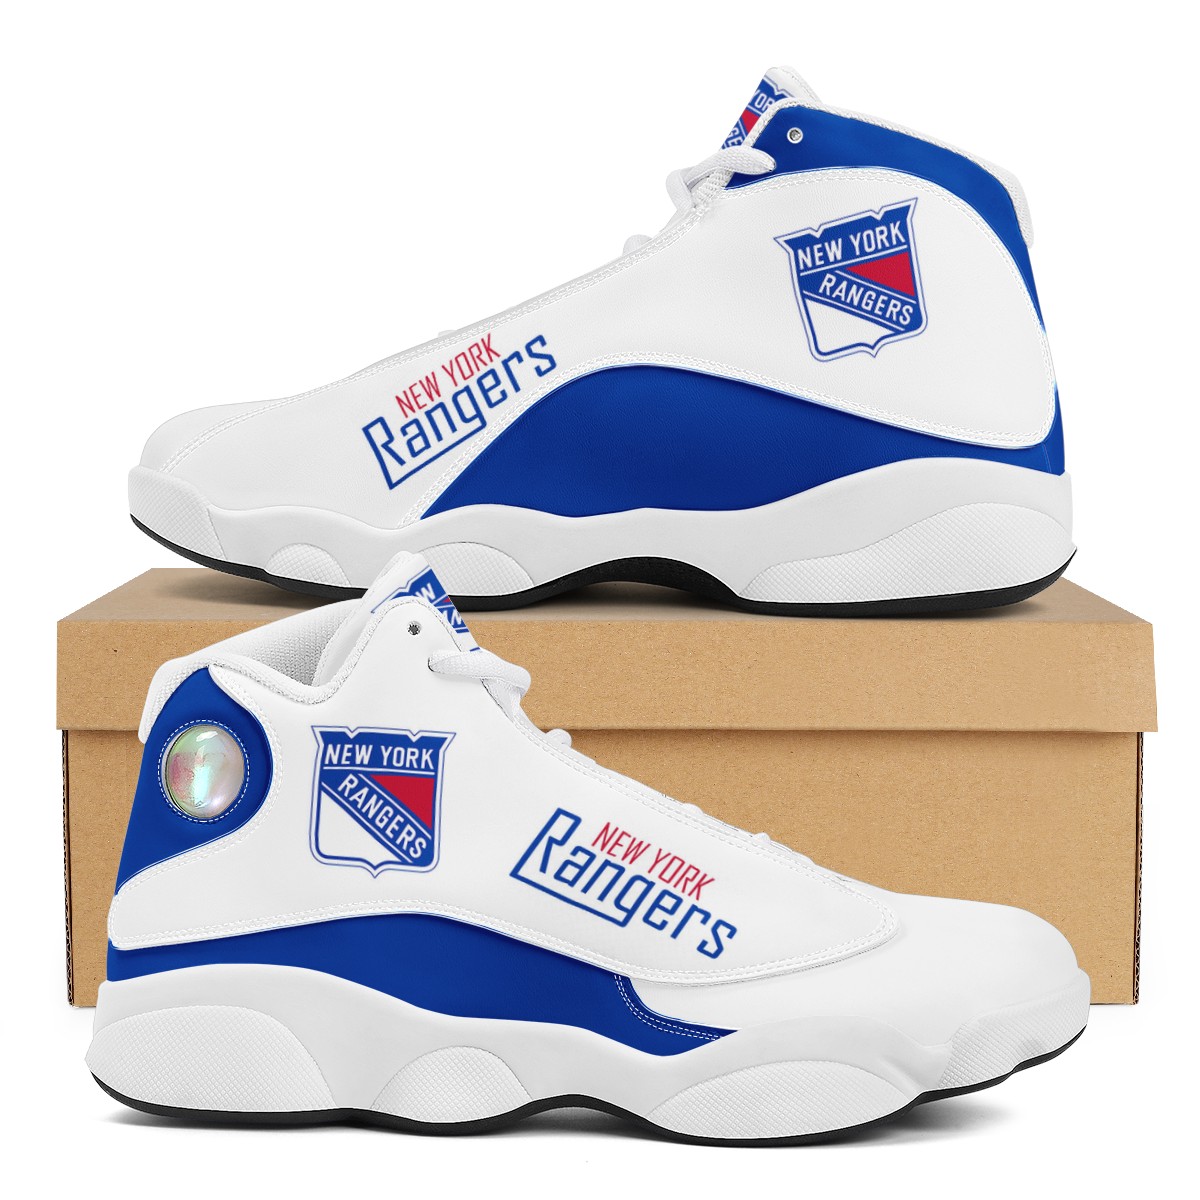 Women's New York Rangers Limited Edition JD13 Sneakers 002